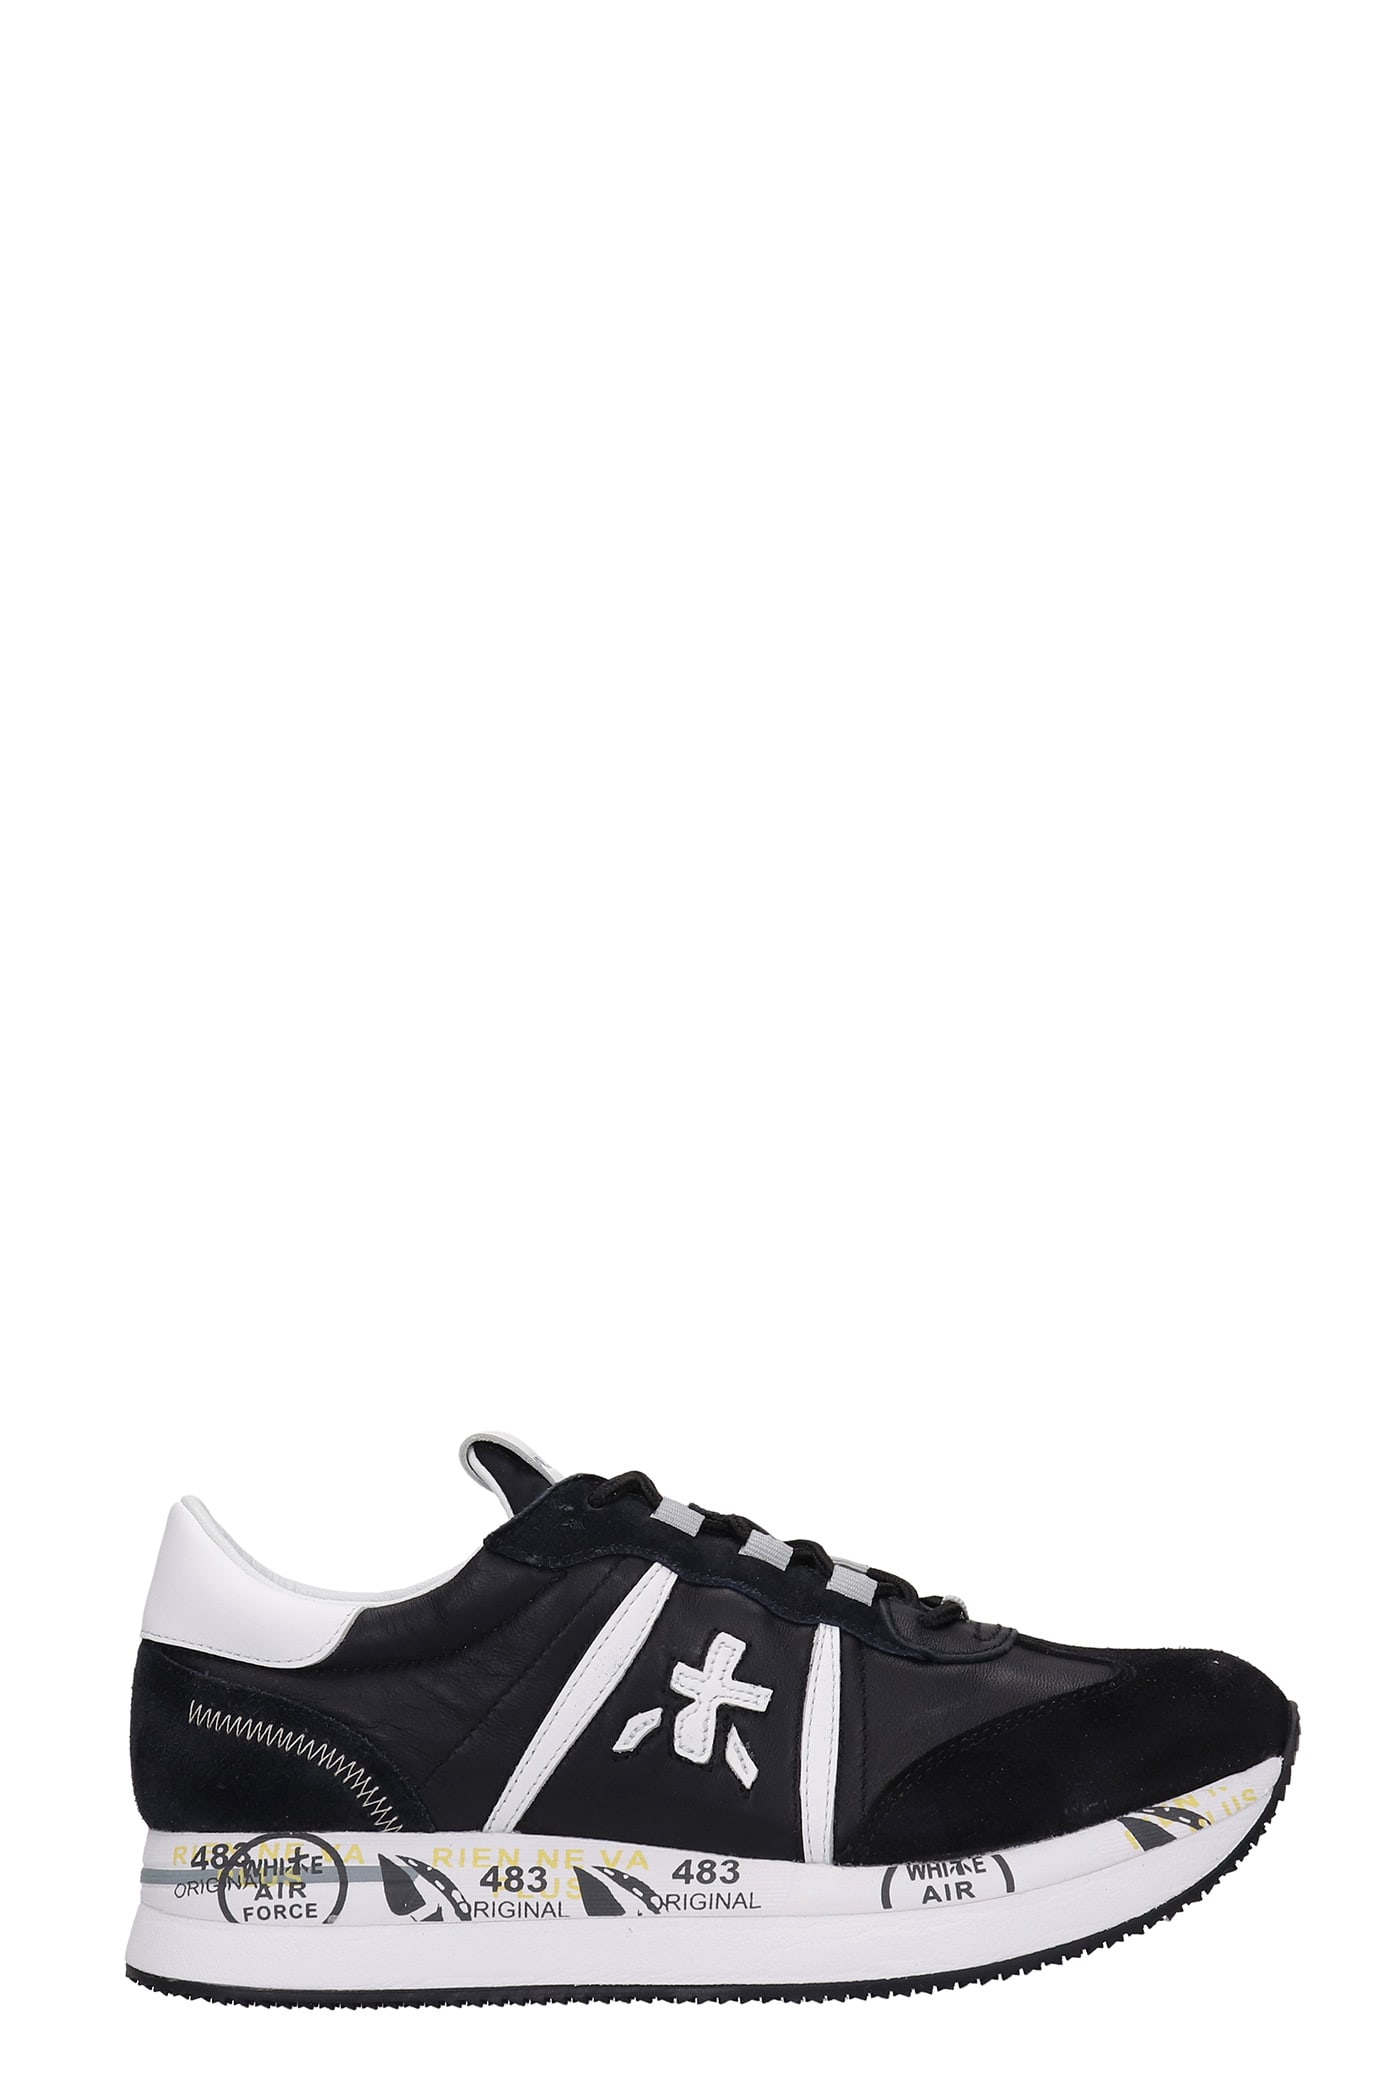 Premiata Conny Sneakers In Black Suede And Leather